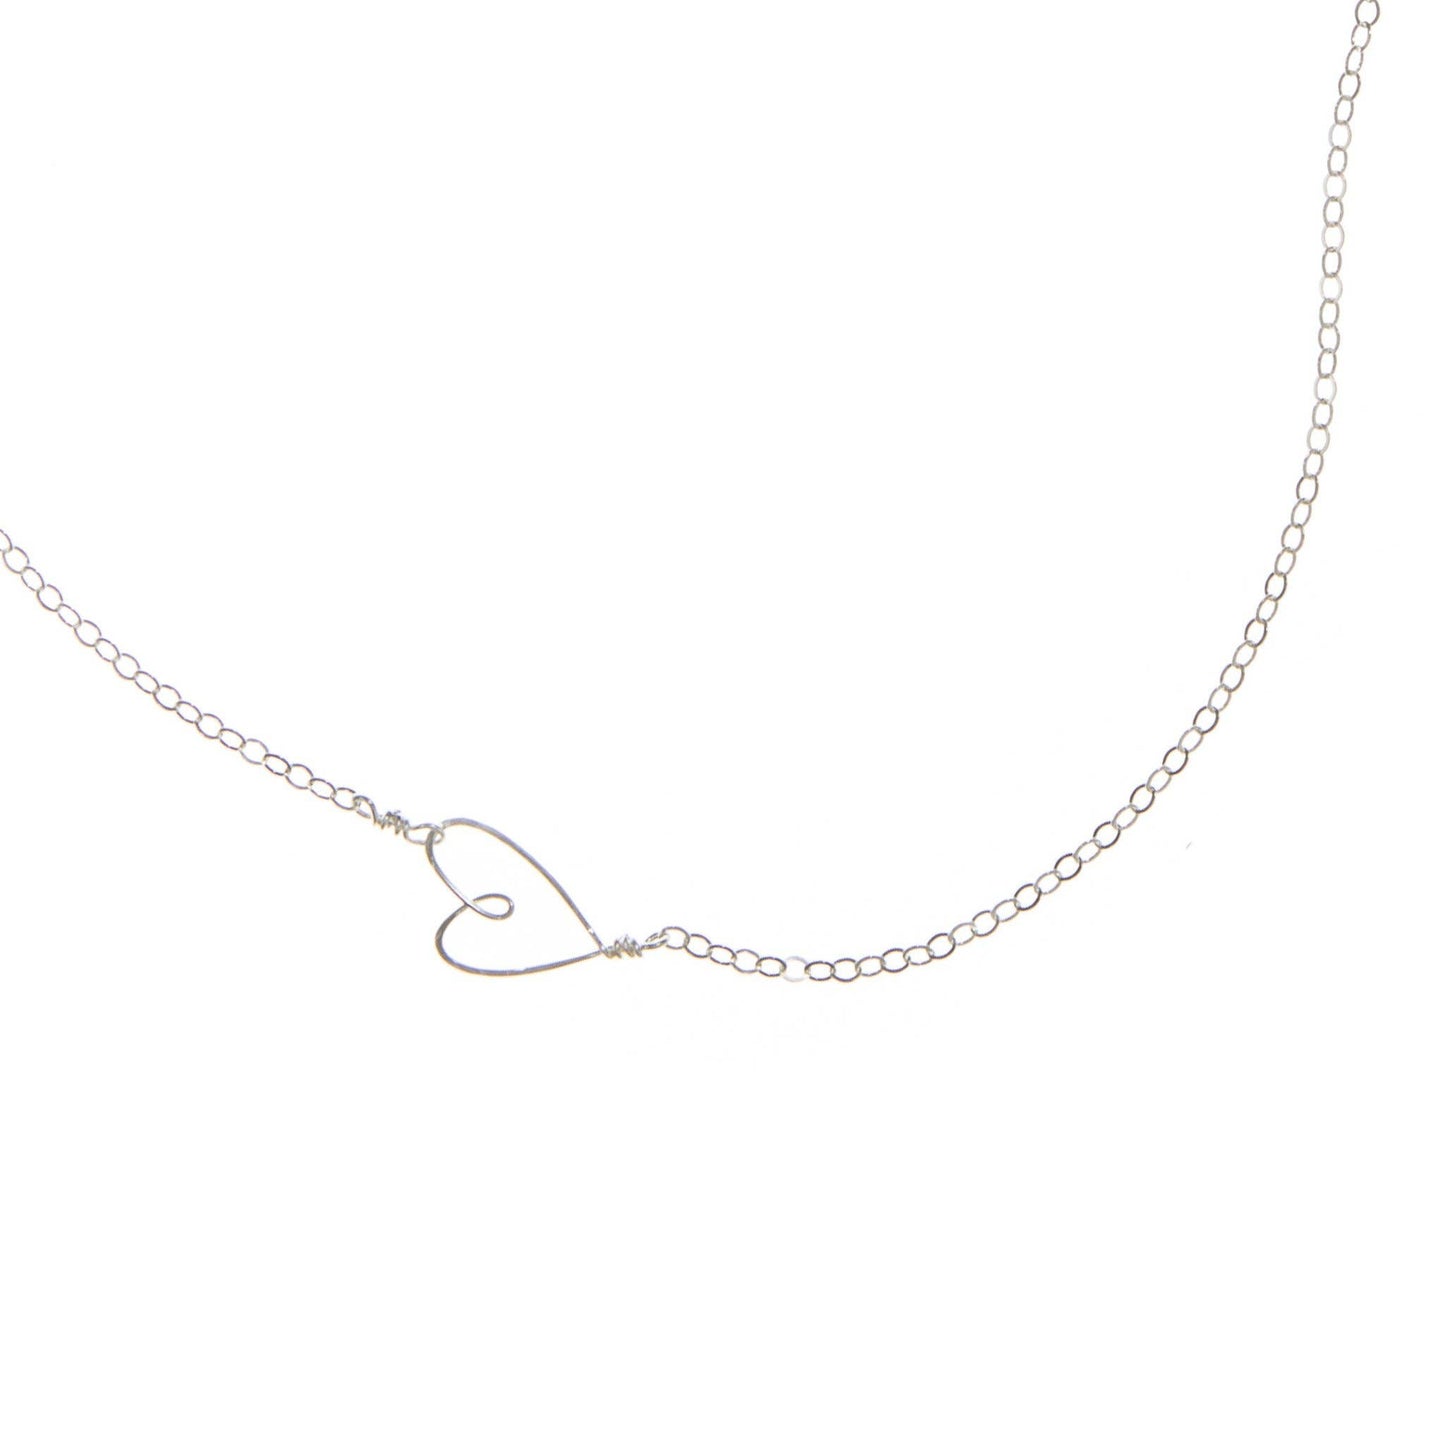 Tiny Sideways Heart Necklace-Sterling Silver